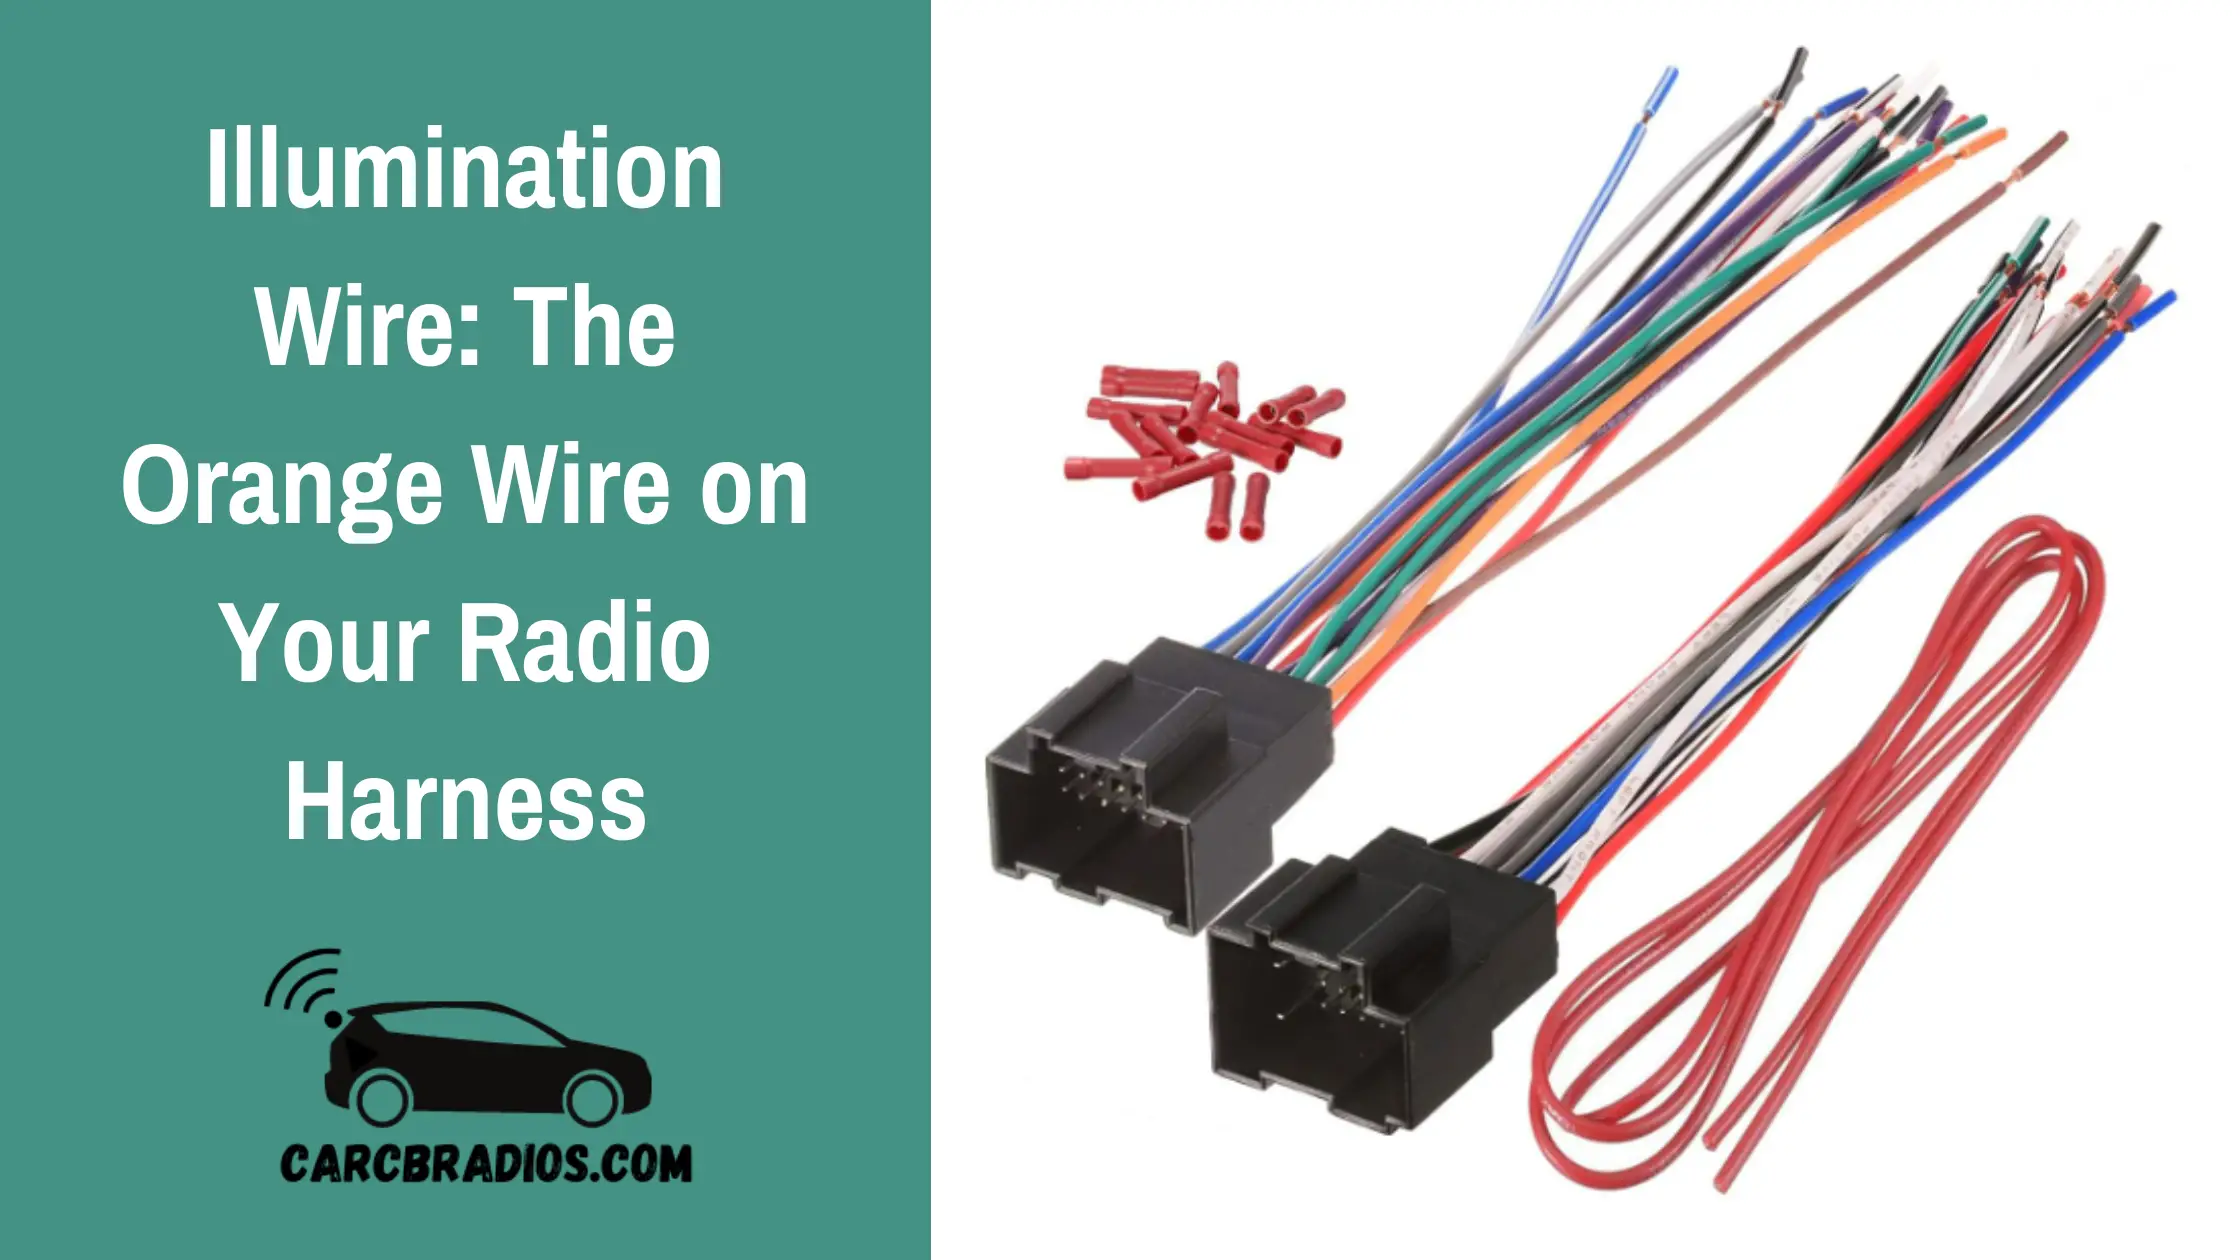 I will be discussing the importance of the illumination wire on a car stereo wiring harness. This wire is responsible for dimming the screen on your aftermarket car stereo and is directly connected to your instrument cluster. It provides a negative or positive trigger that tells your radio when you turn on and off your headlights.